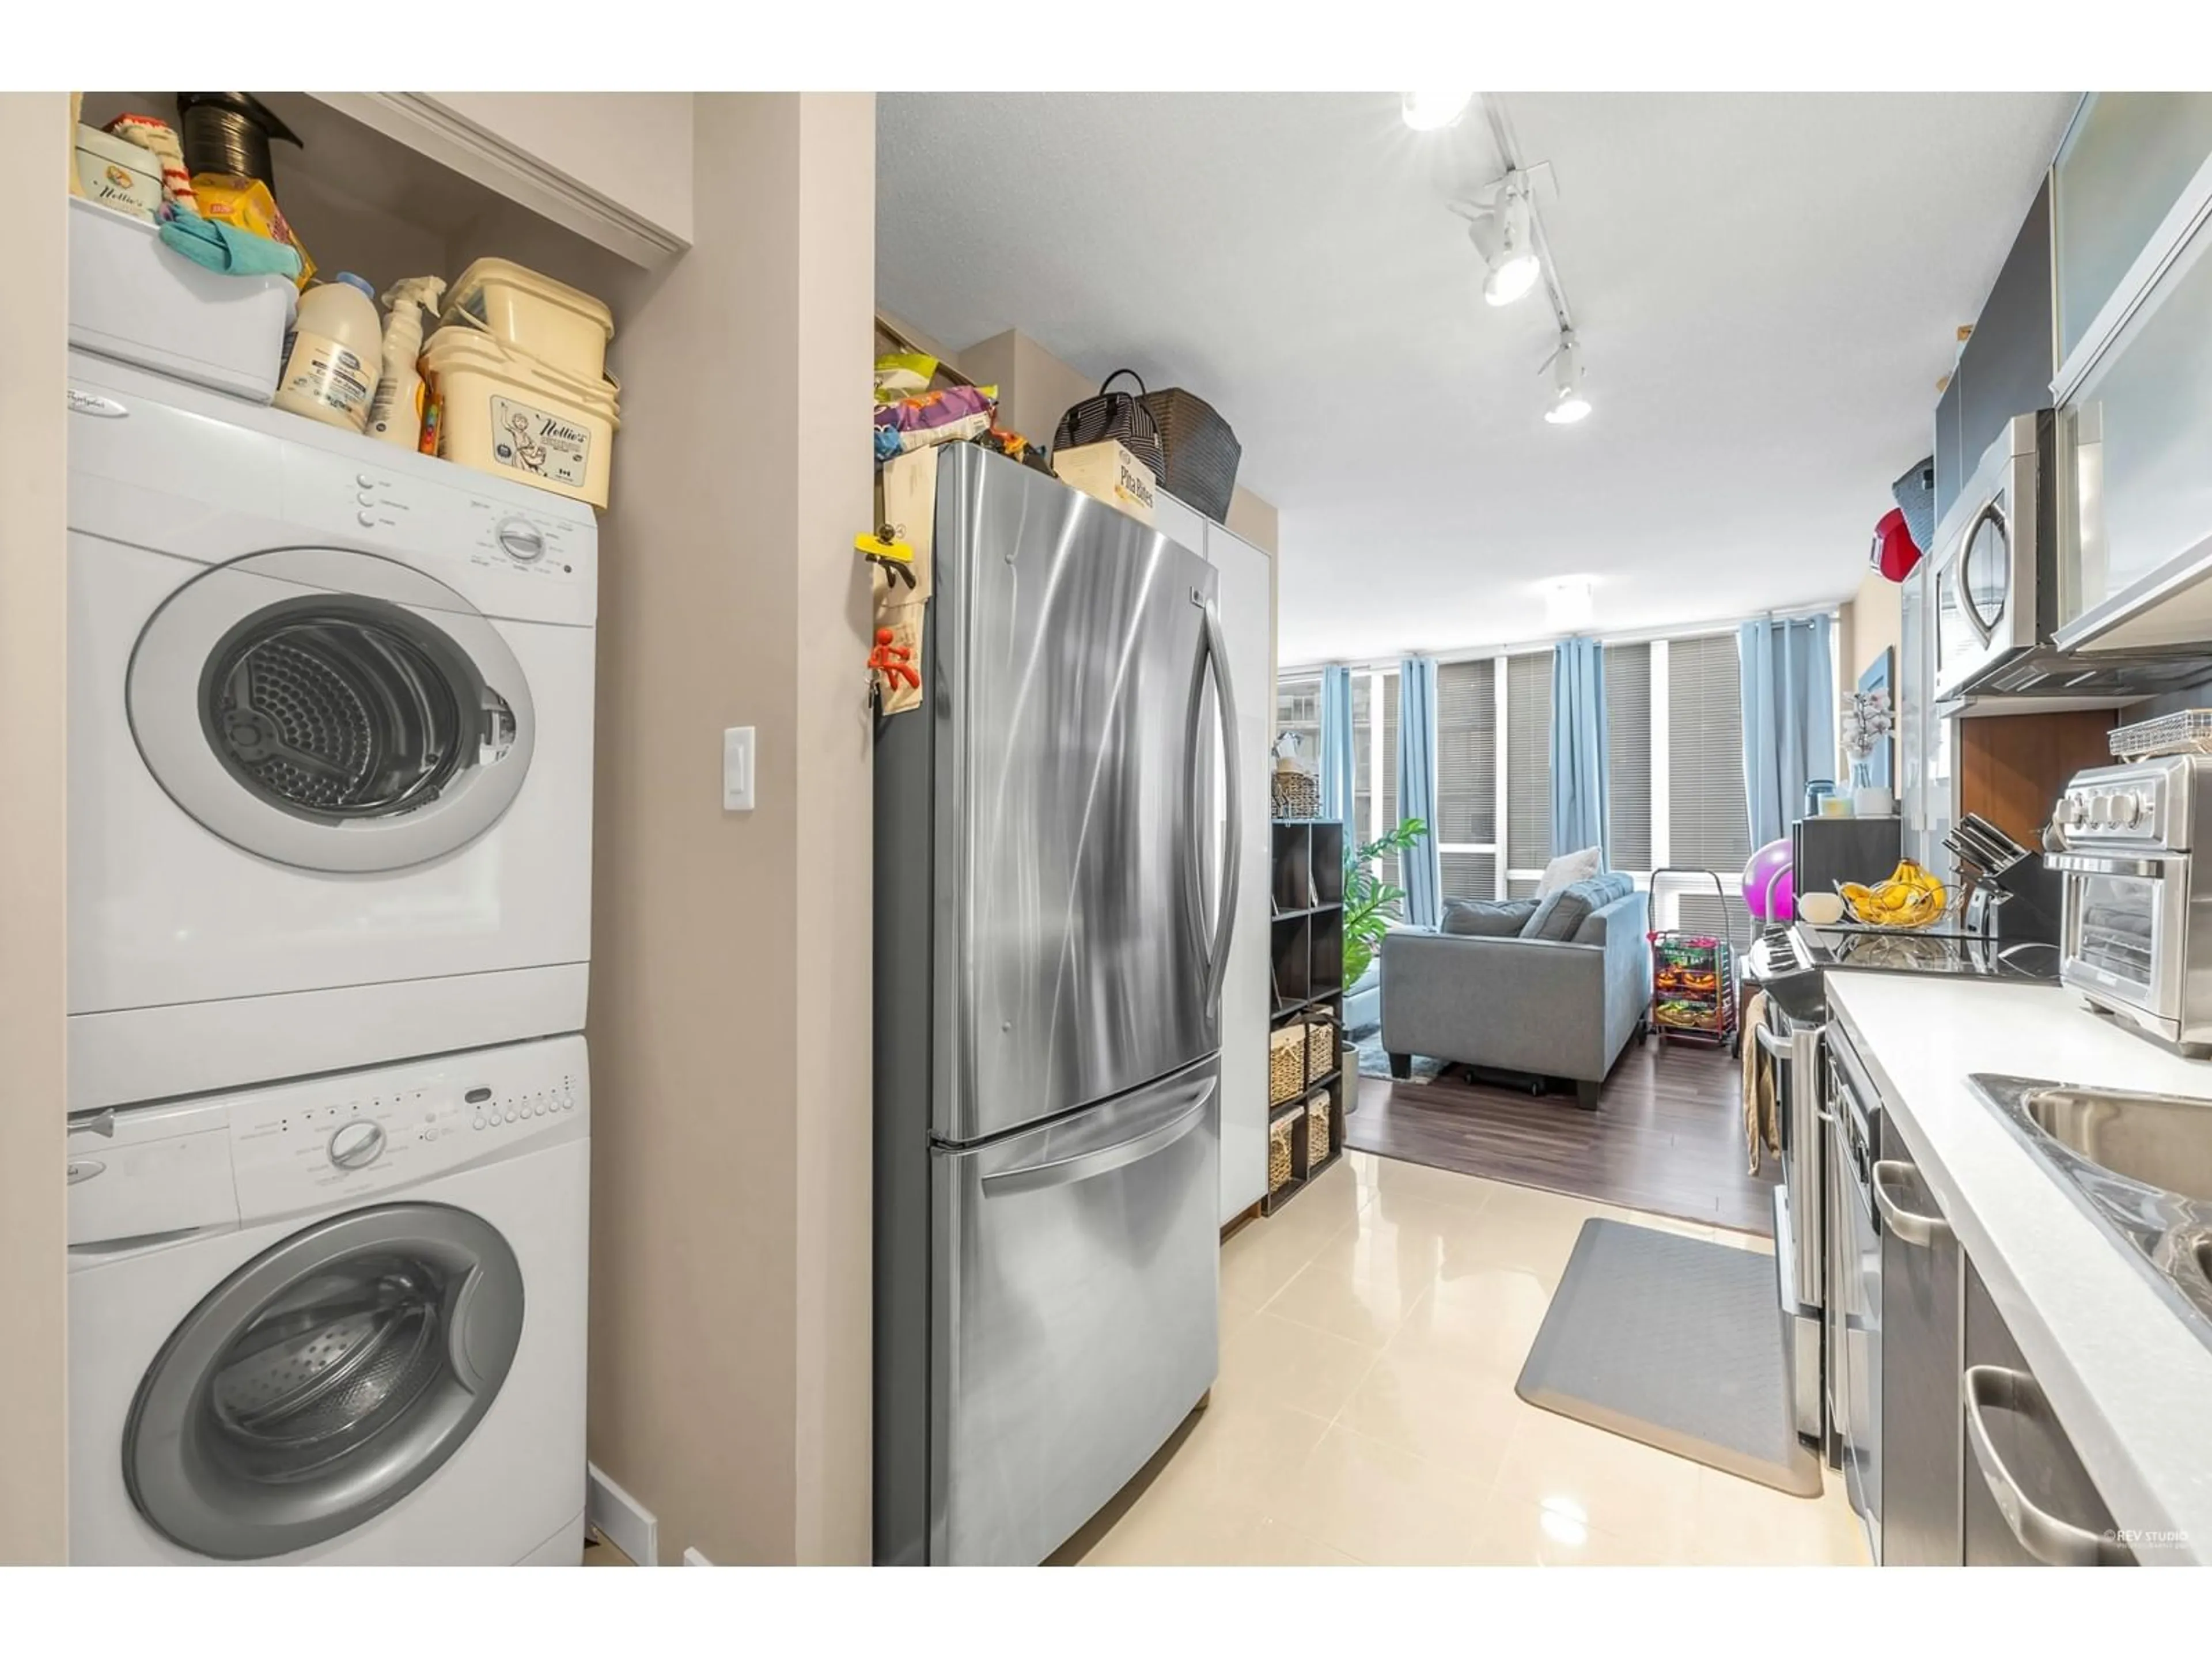 Kitchen with laundary machines for 2401 13688 100 AVENUE, Surrey British Columbia V3T0G5